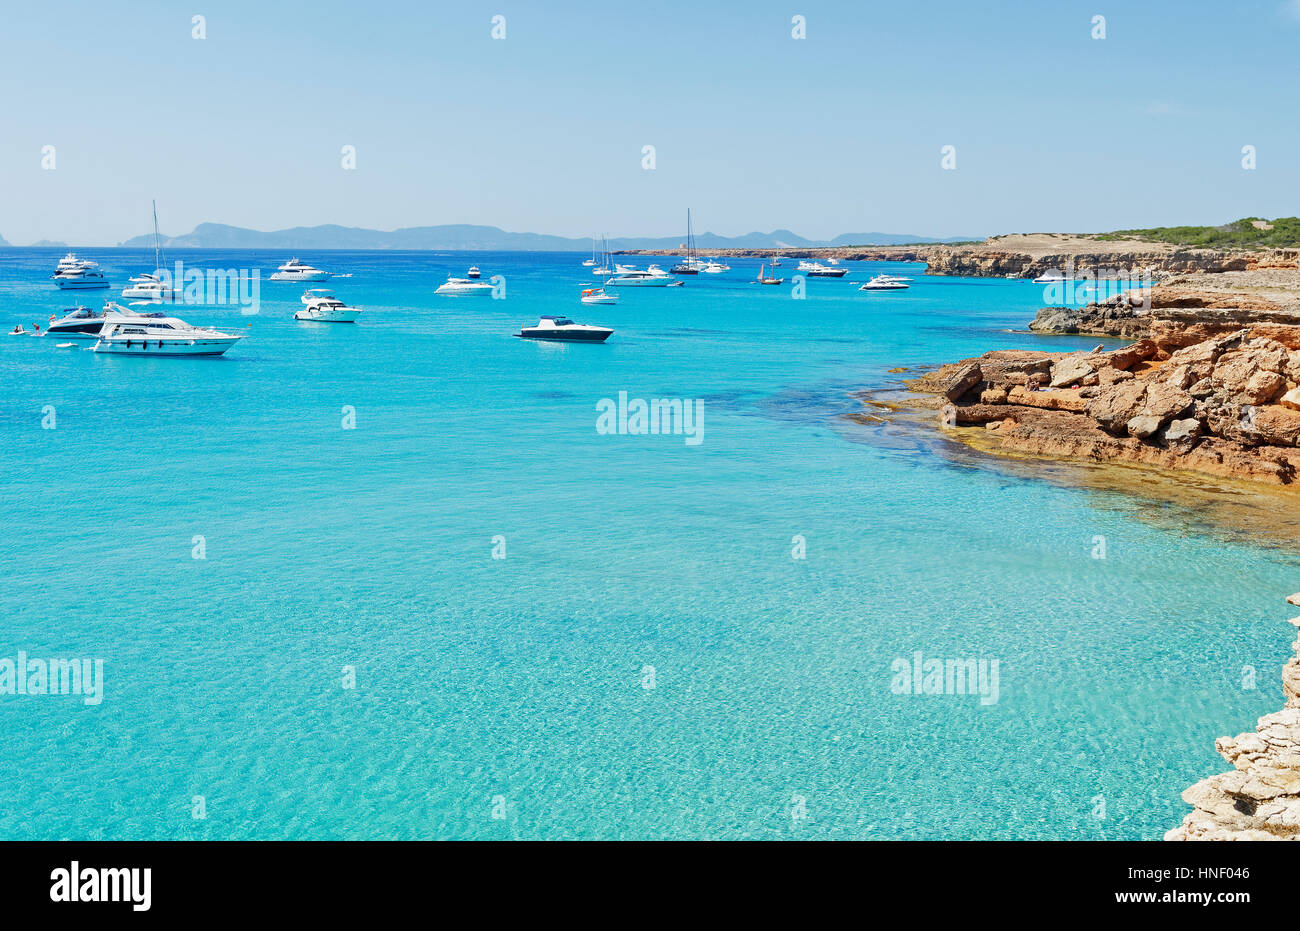 Boats in turquoise water, Formentera, Baleric Islands, Spain Stock Photo